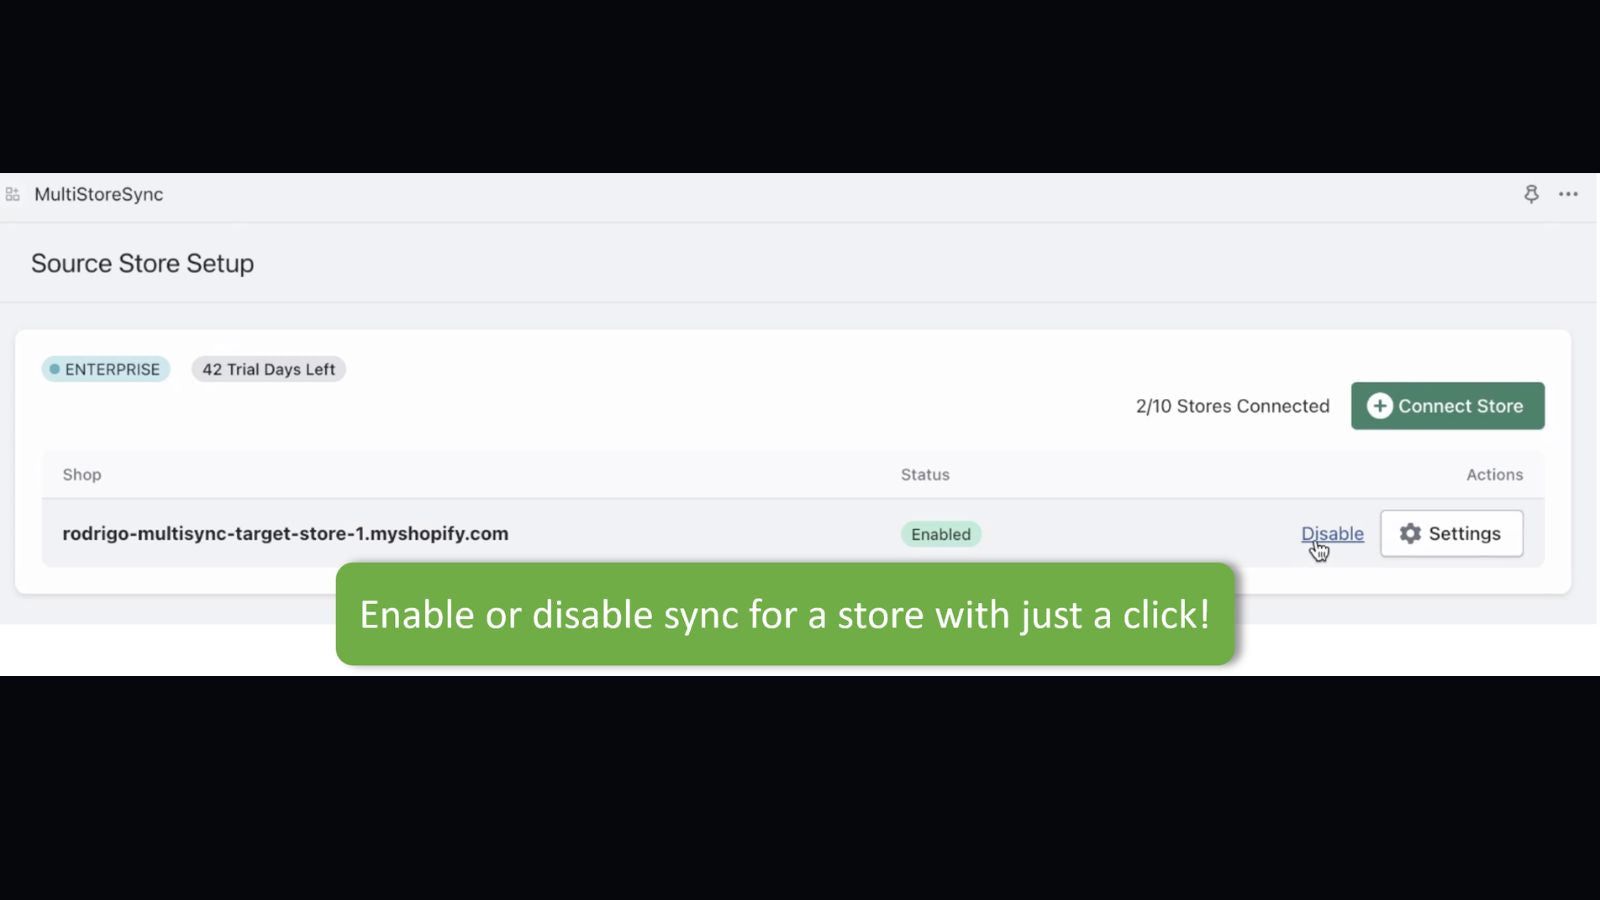 Enable or disable sync for a store with just a click